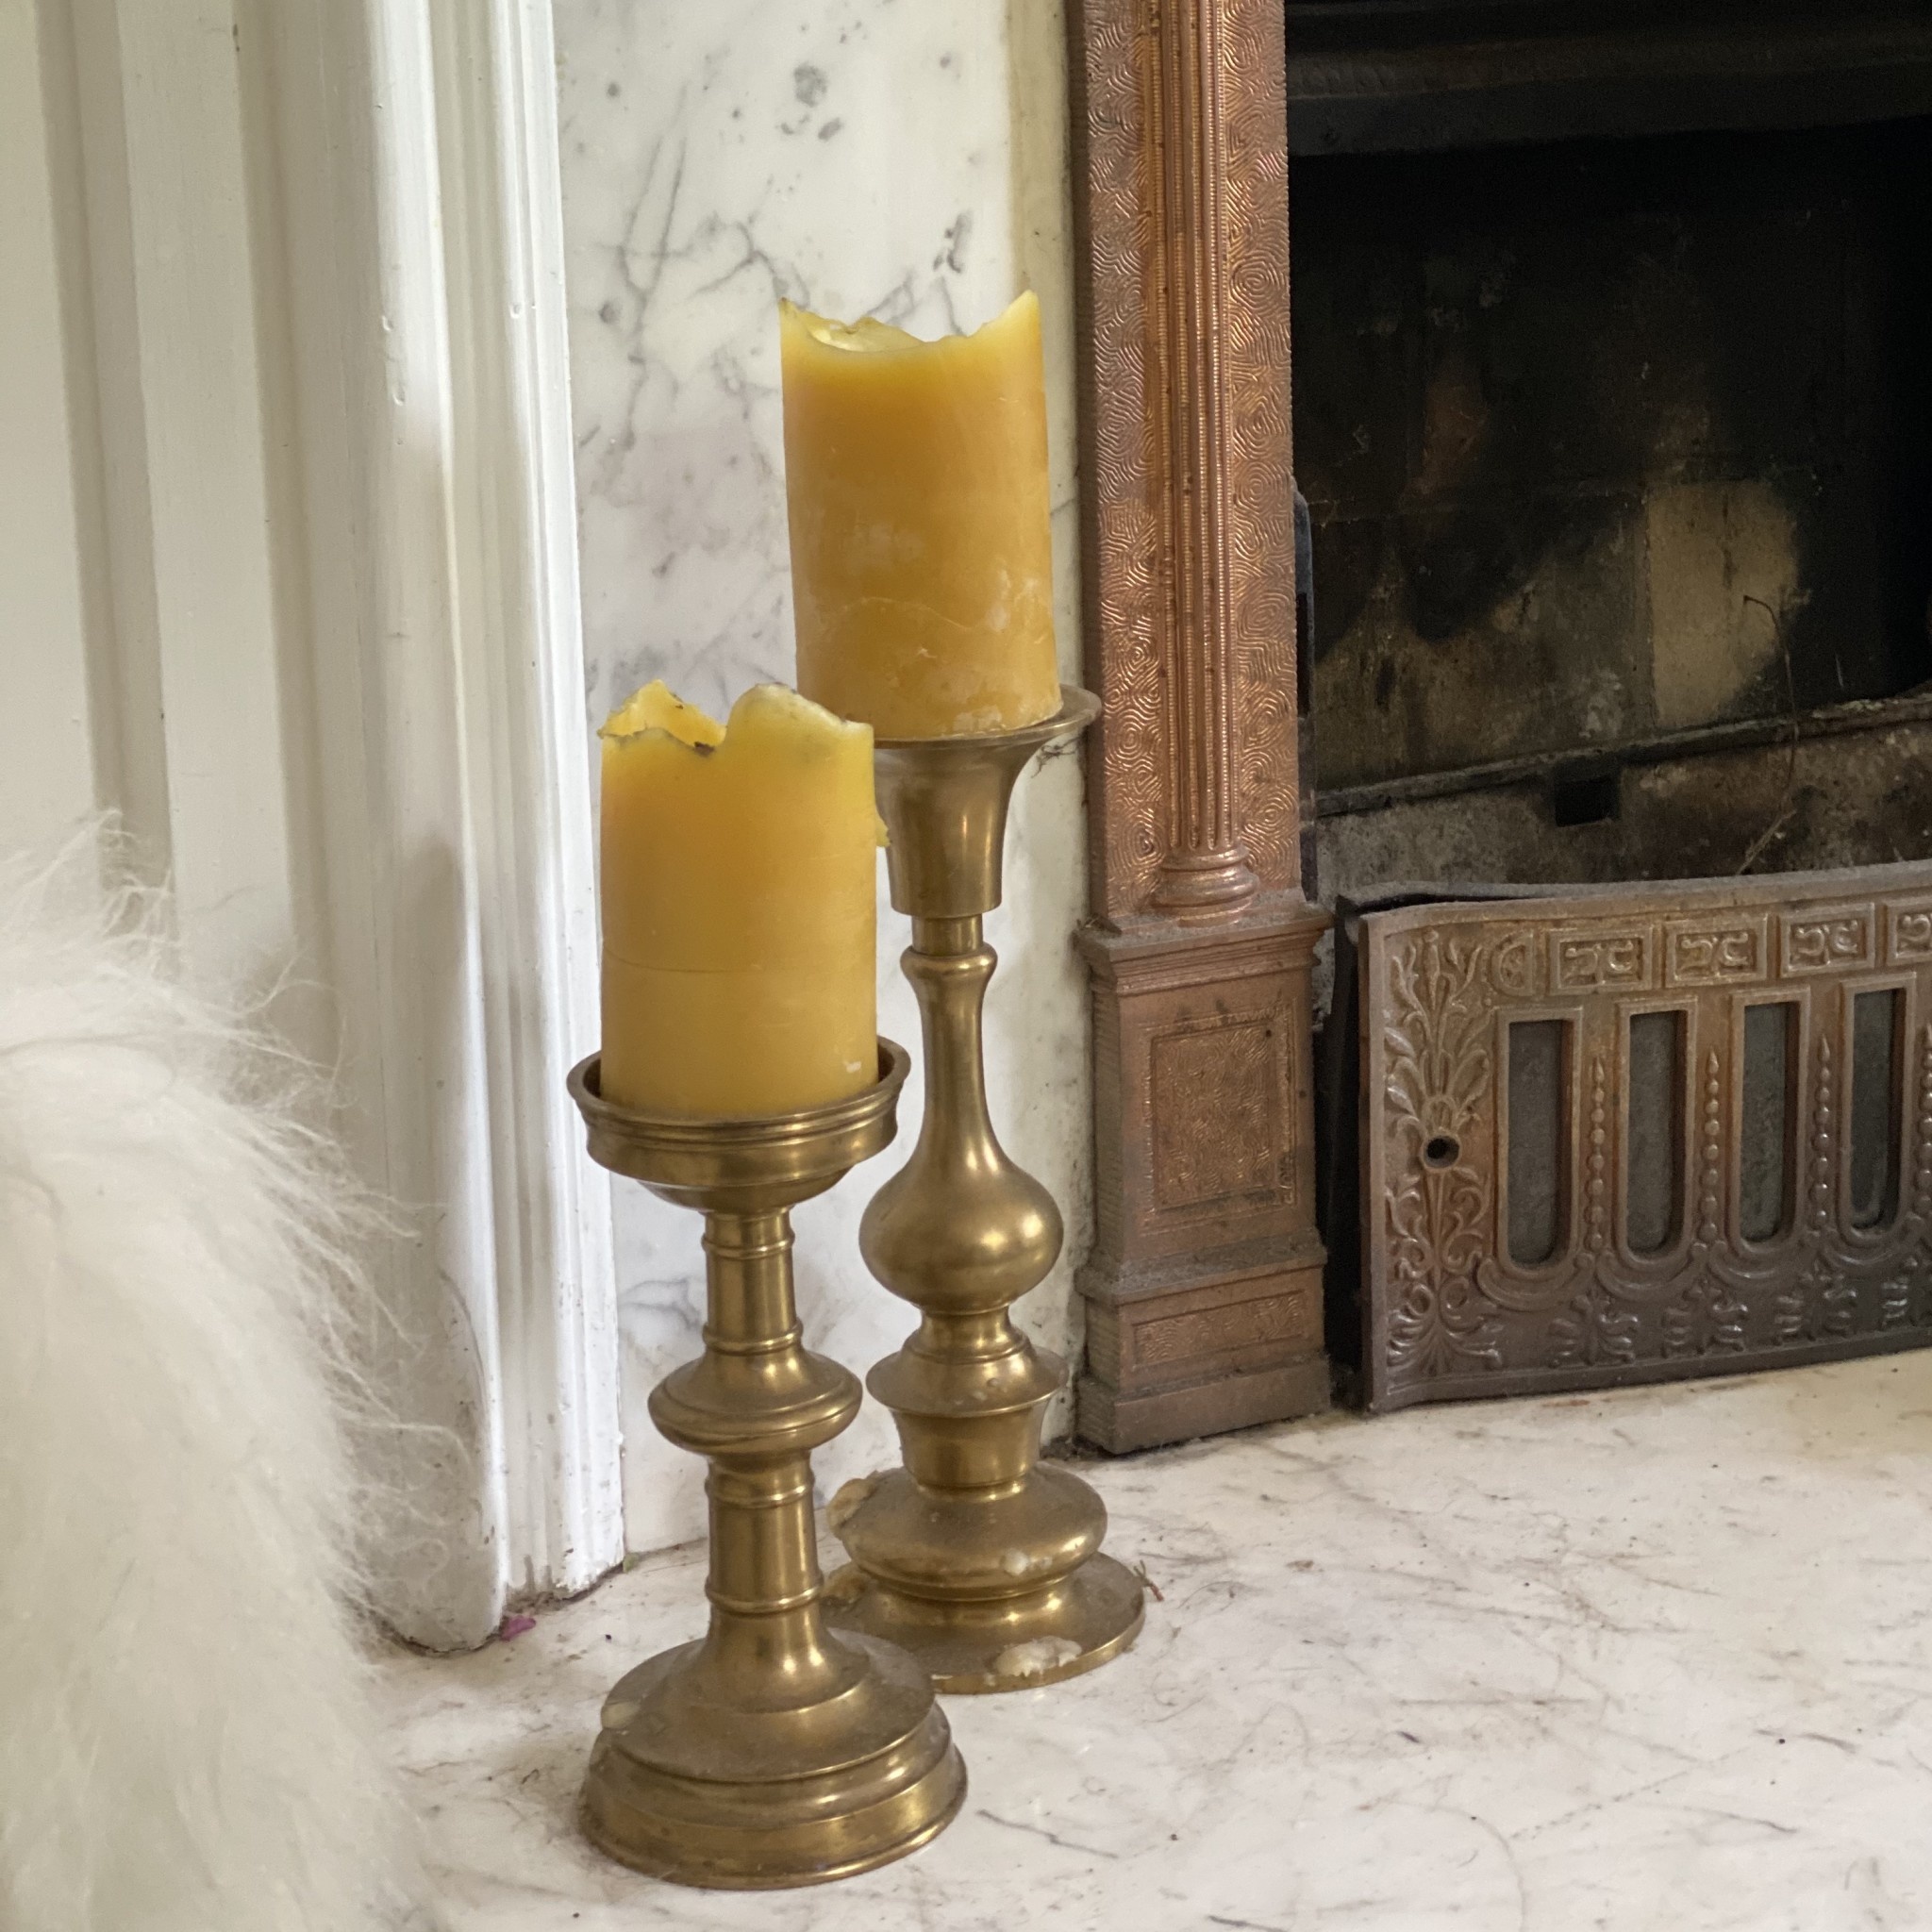 Old Mill Candles Large Beeswax Pillar Candle 90 hr